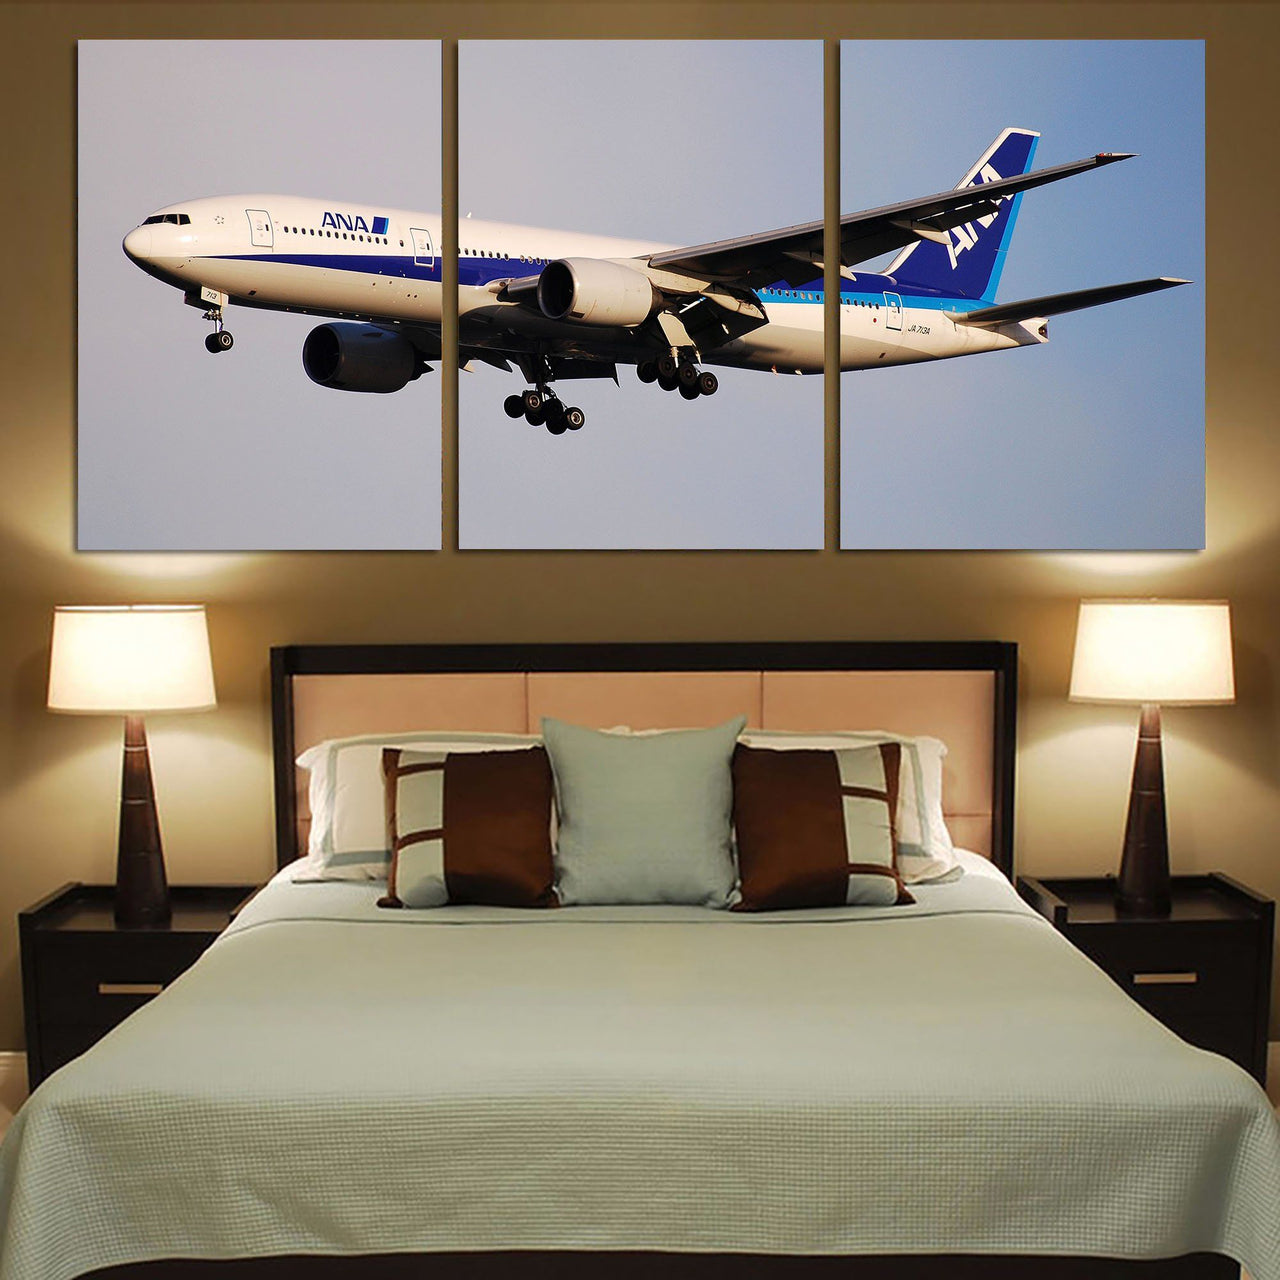 ANA's Boeing 777 Printed Canvas Posters (3 Pieces) Aviation Shop 